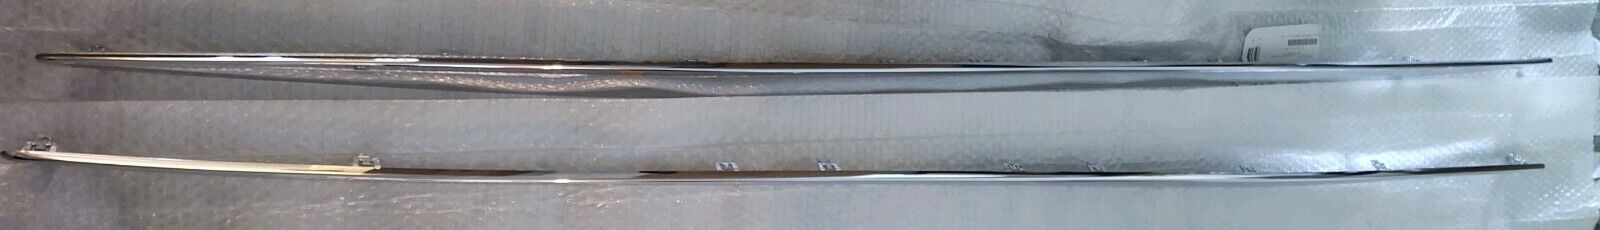 Mercedes-Benz OEM Chrome Side Skirt Trim C217 Coupe Convertible For AMG Skirts New